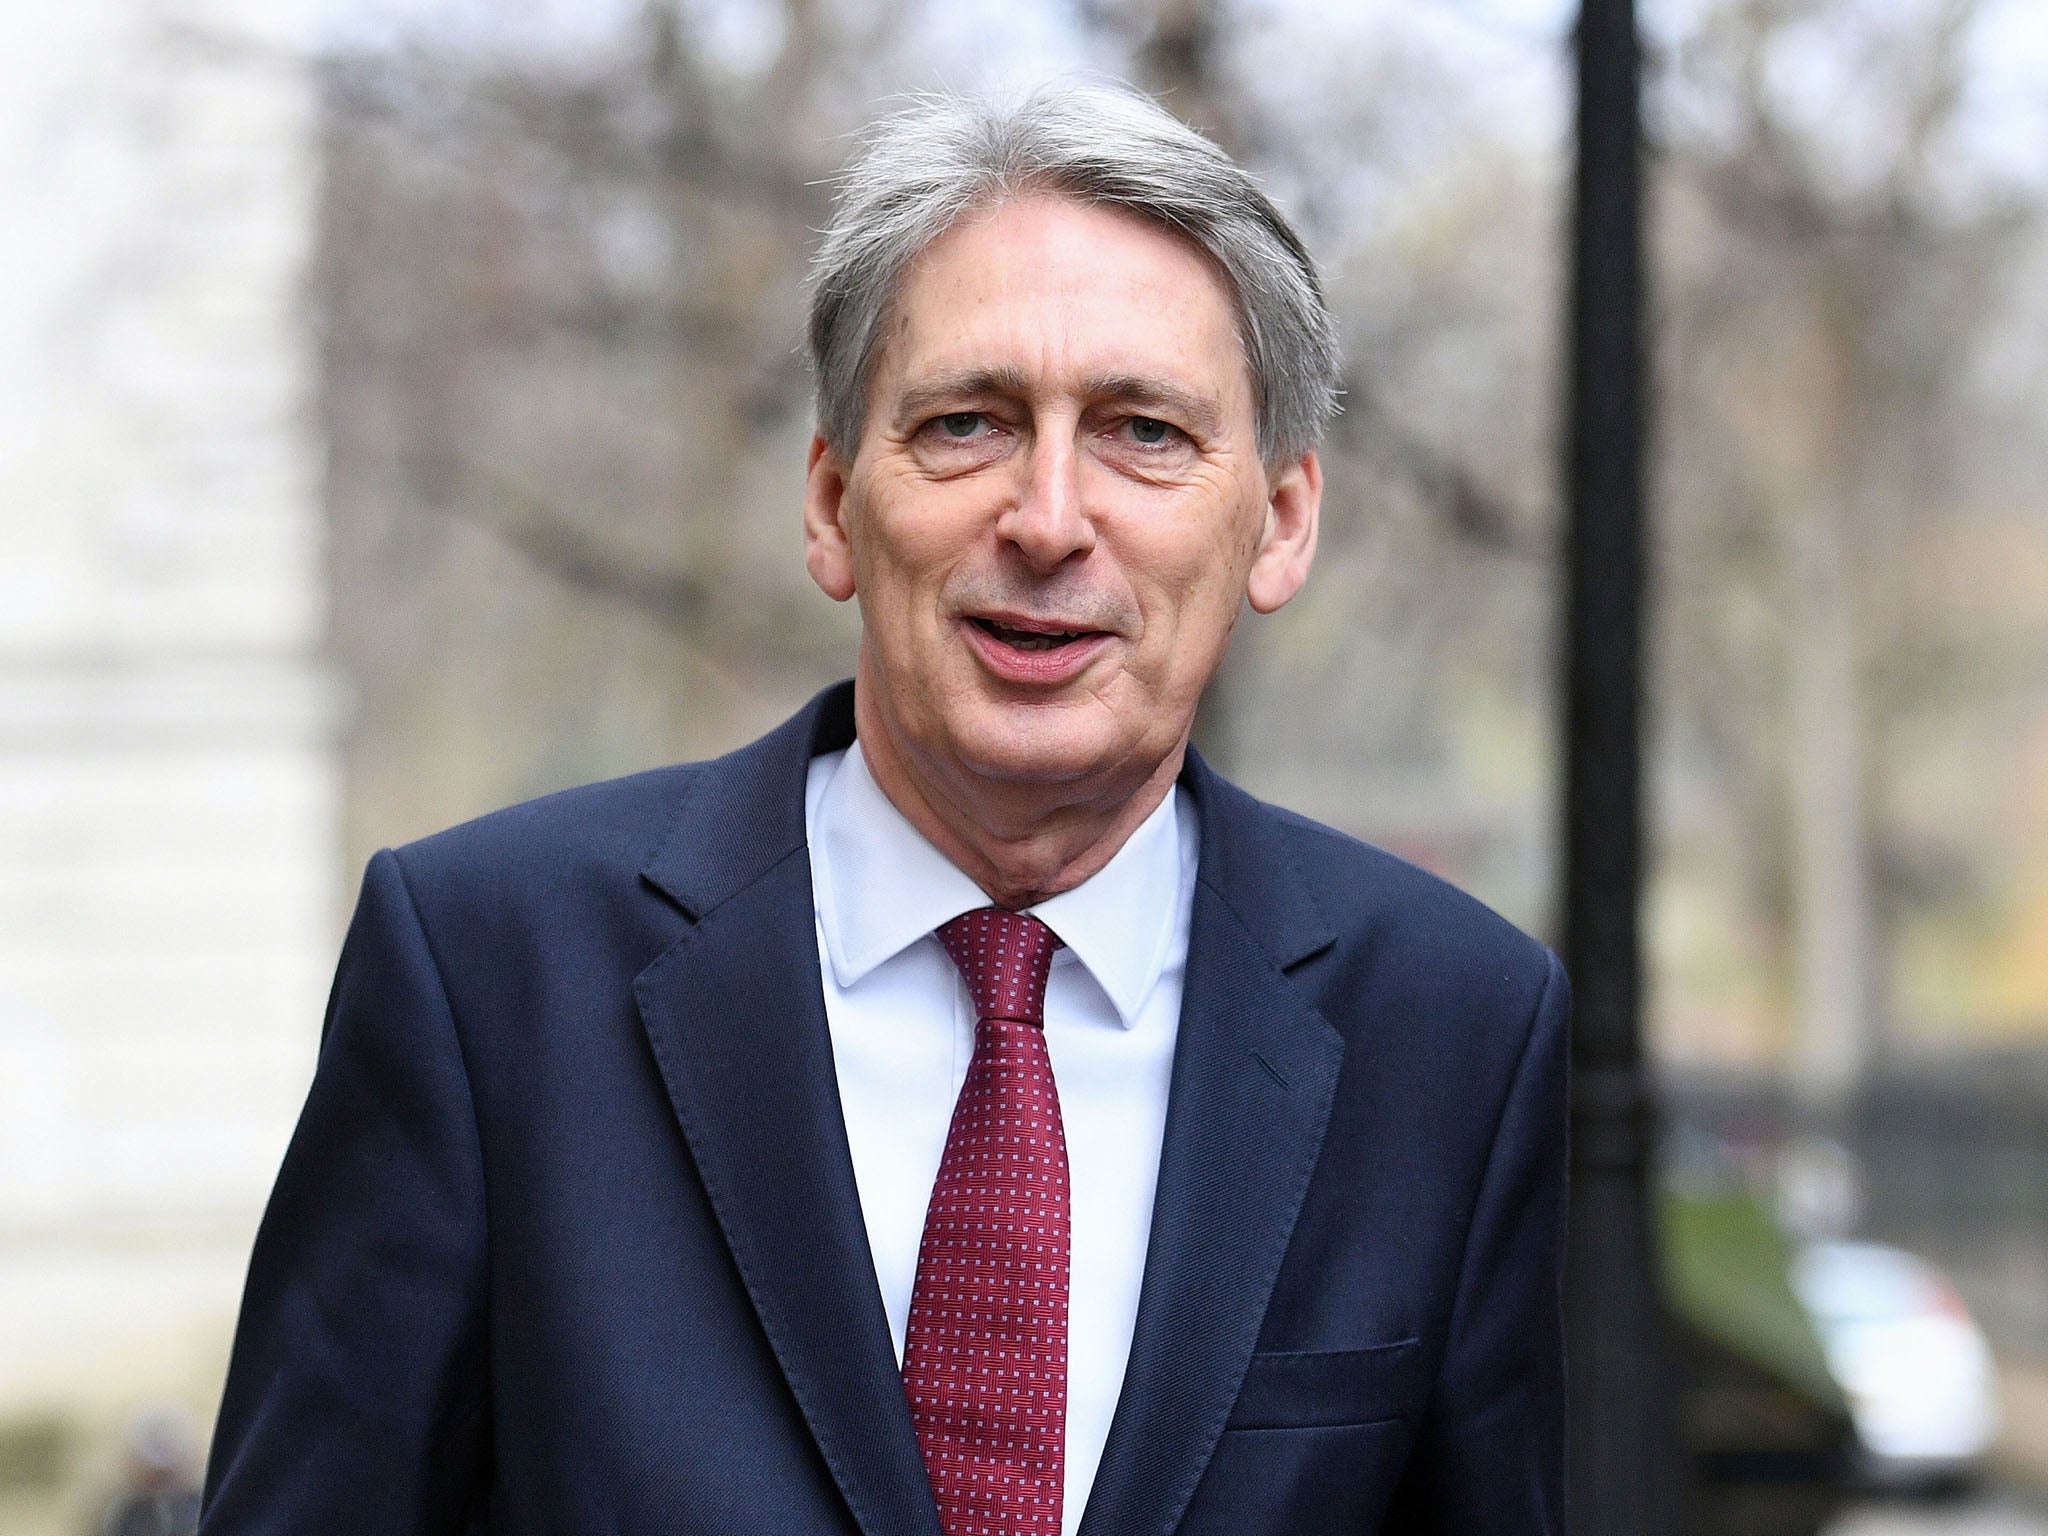 Chancellor Philip Hammond described the investment as a 'vote of confidence' in Britain’s economy